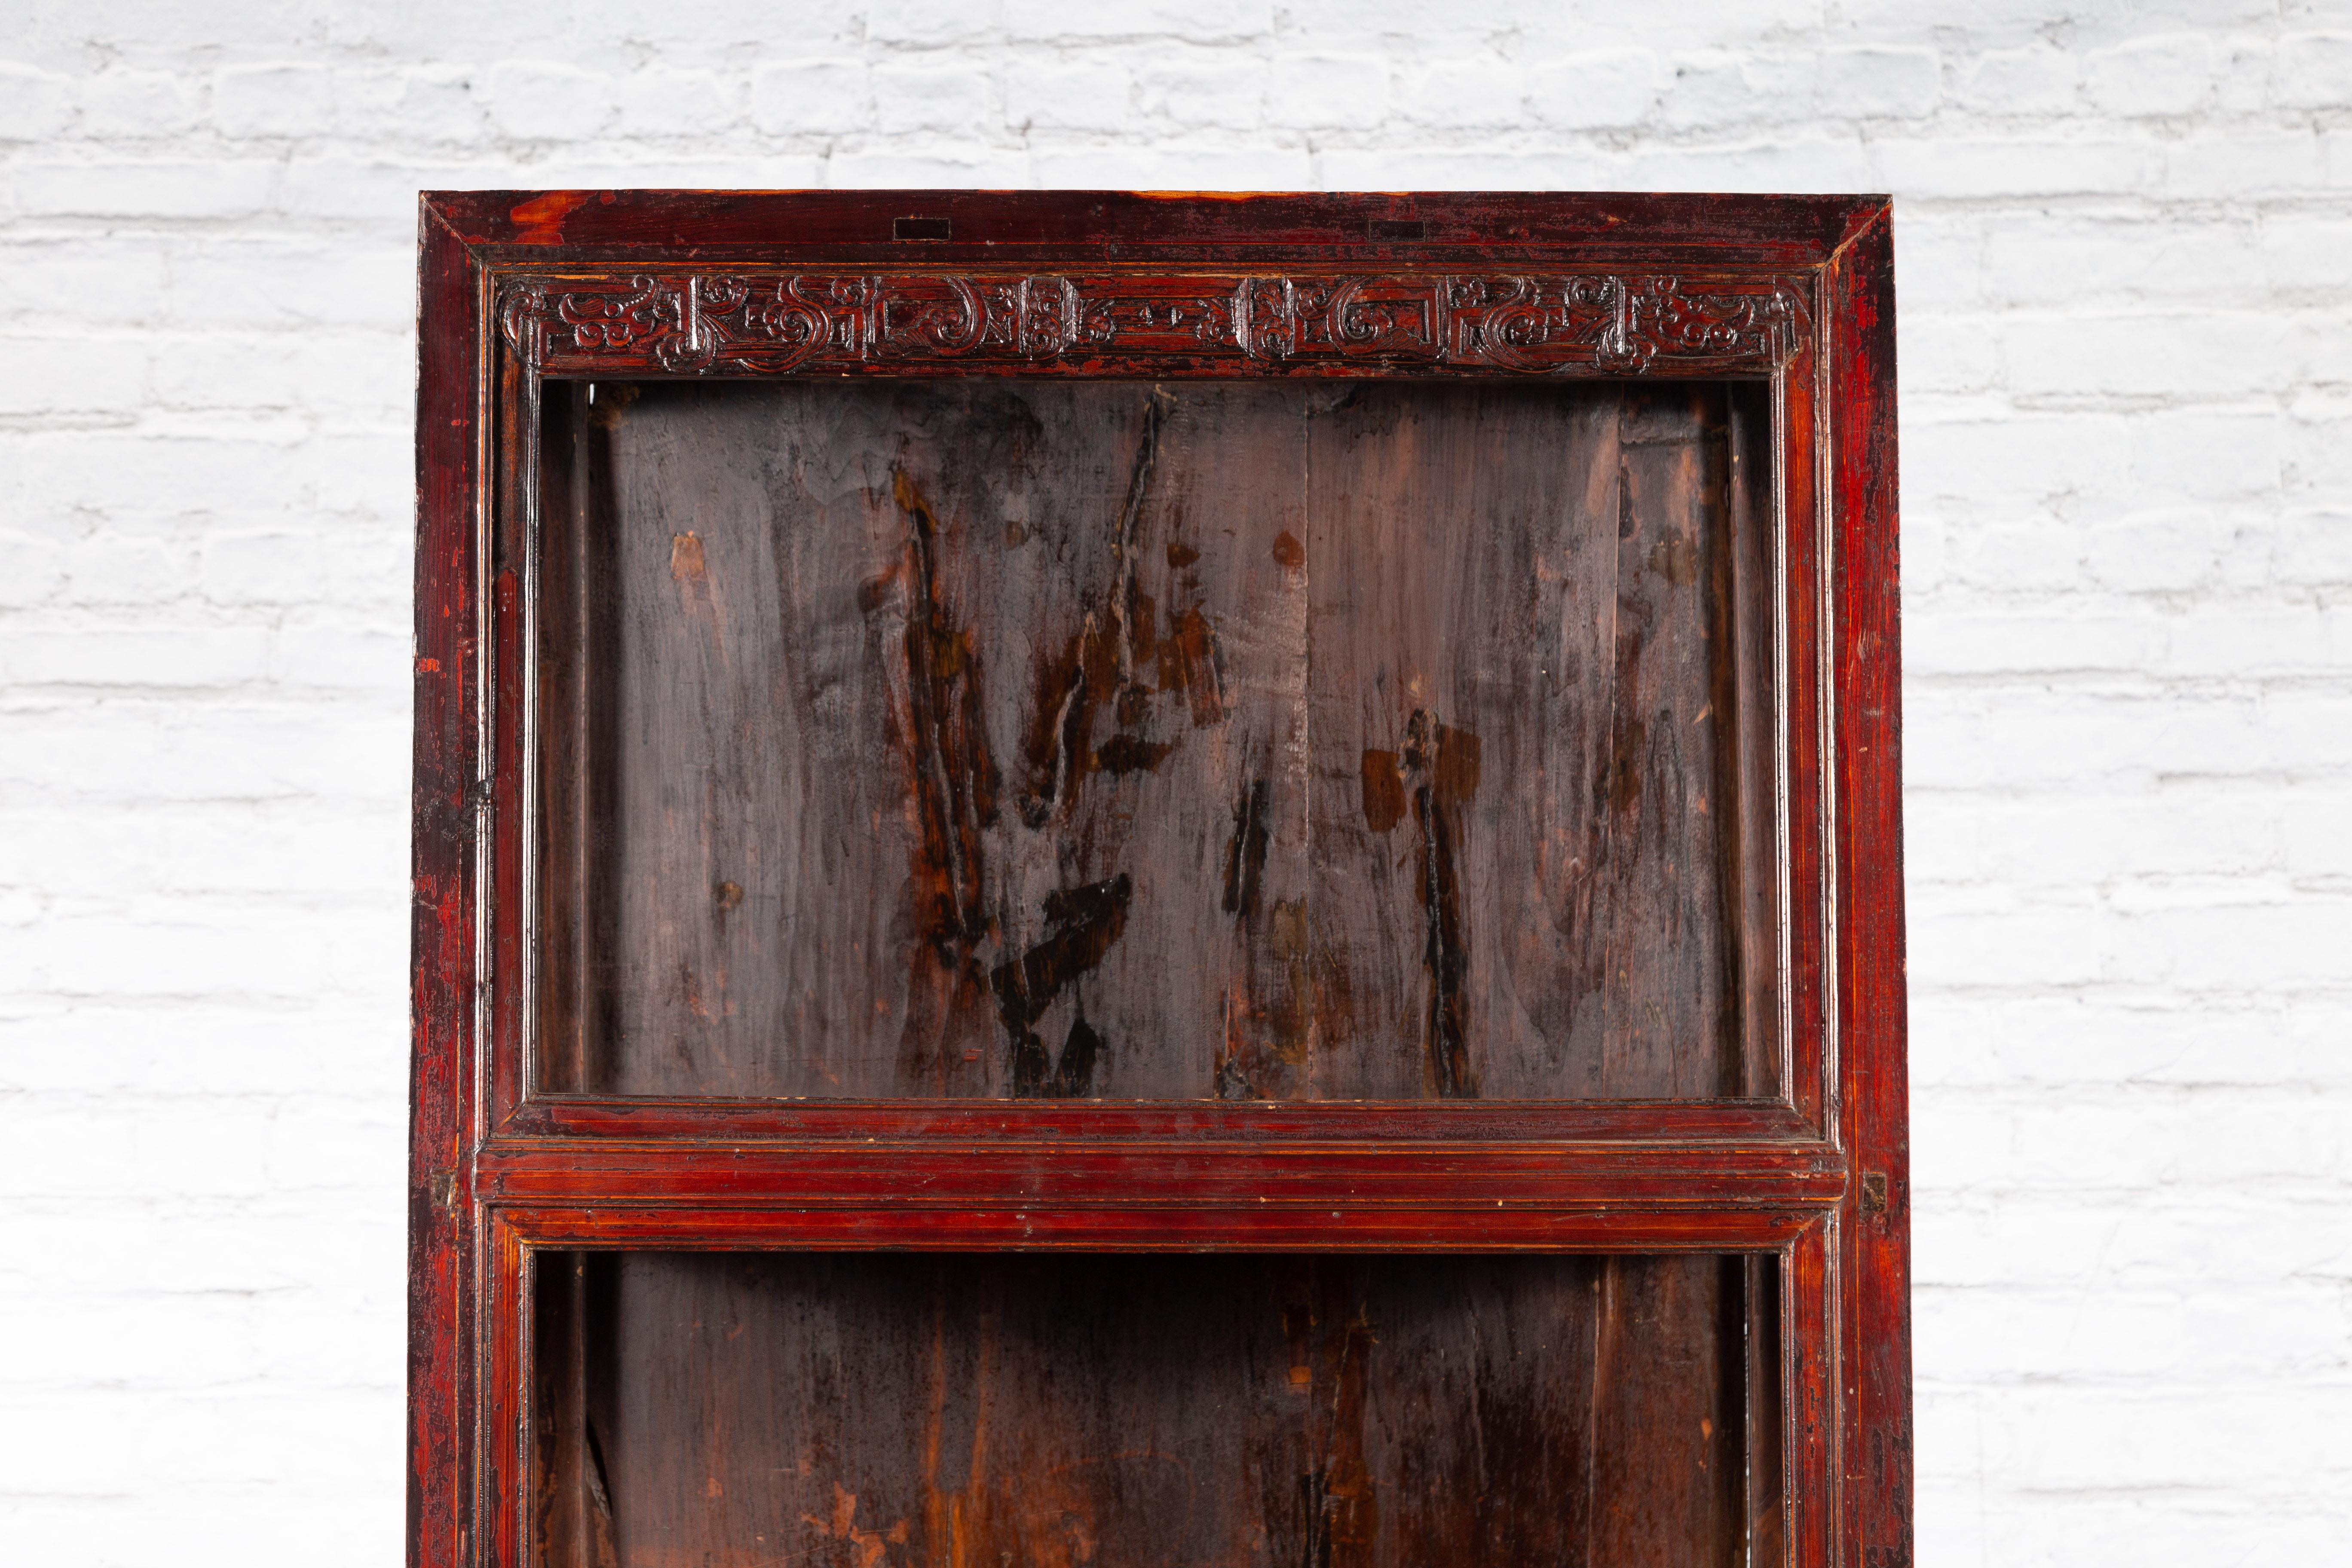 Chinese Qing Dynasty 19th Century Lacquered Cabinet with Carved Dragon Motifs For Sale 1